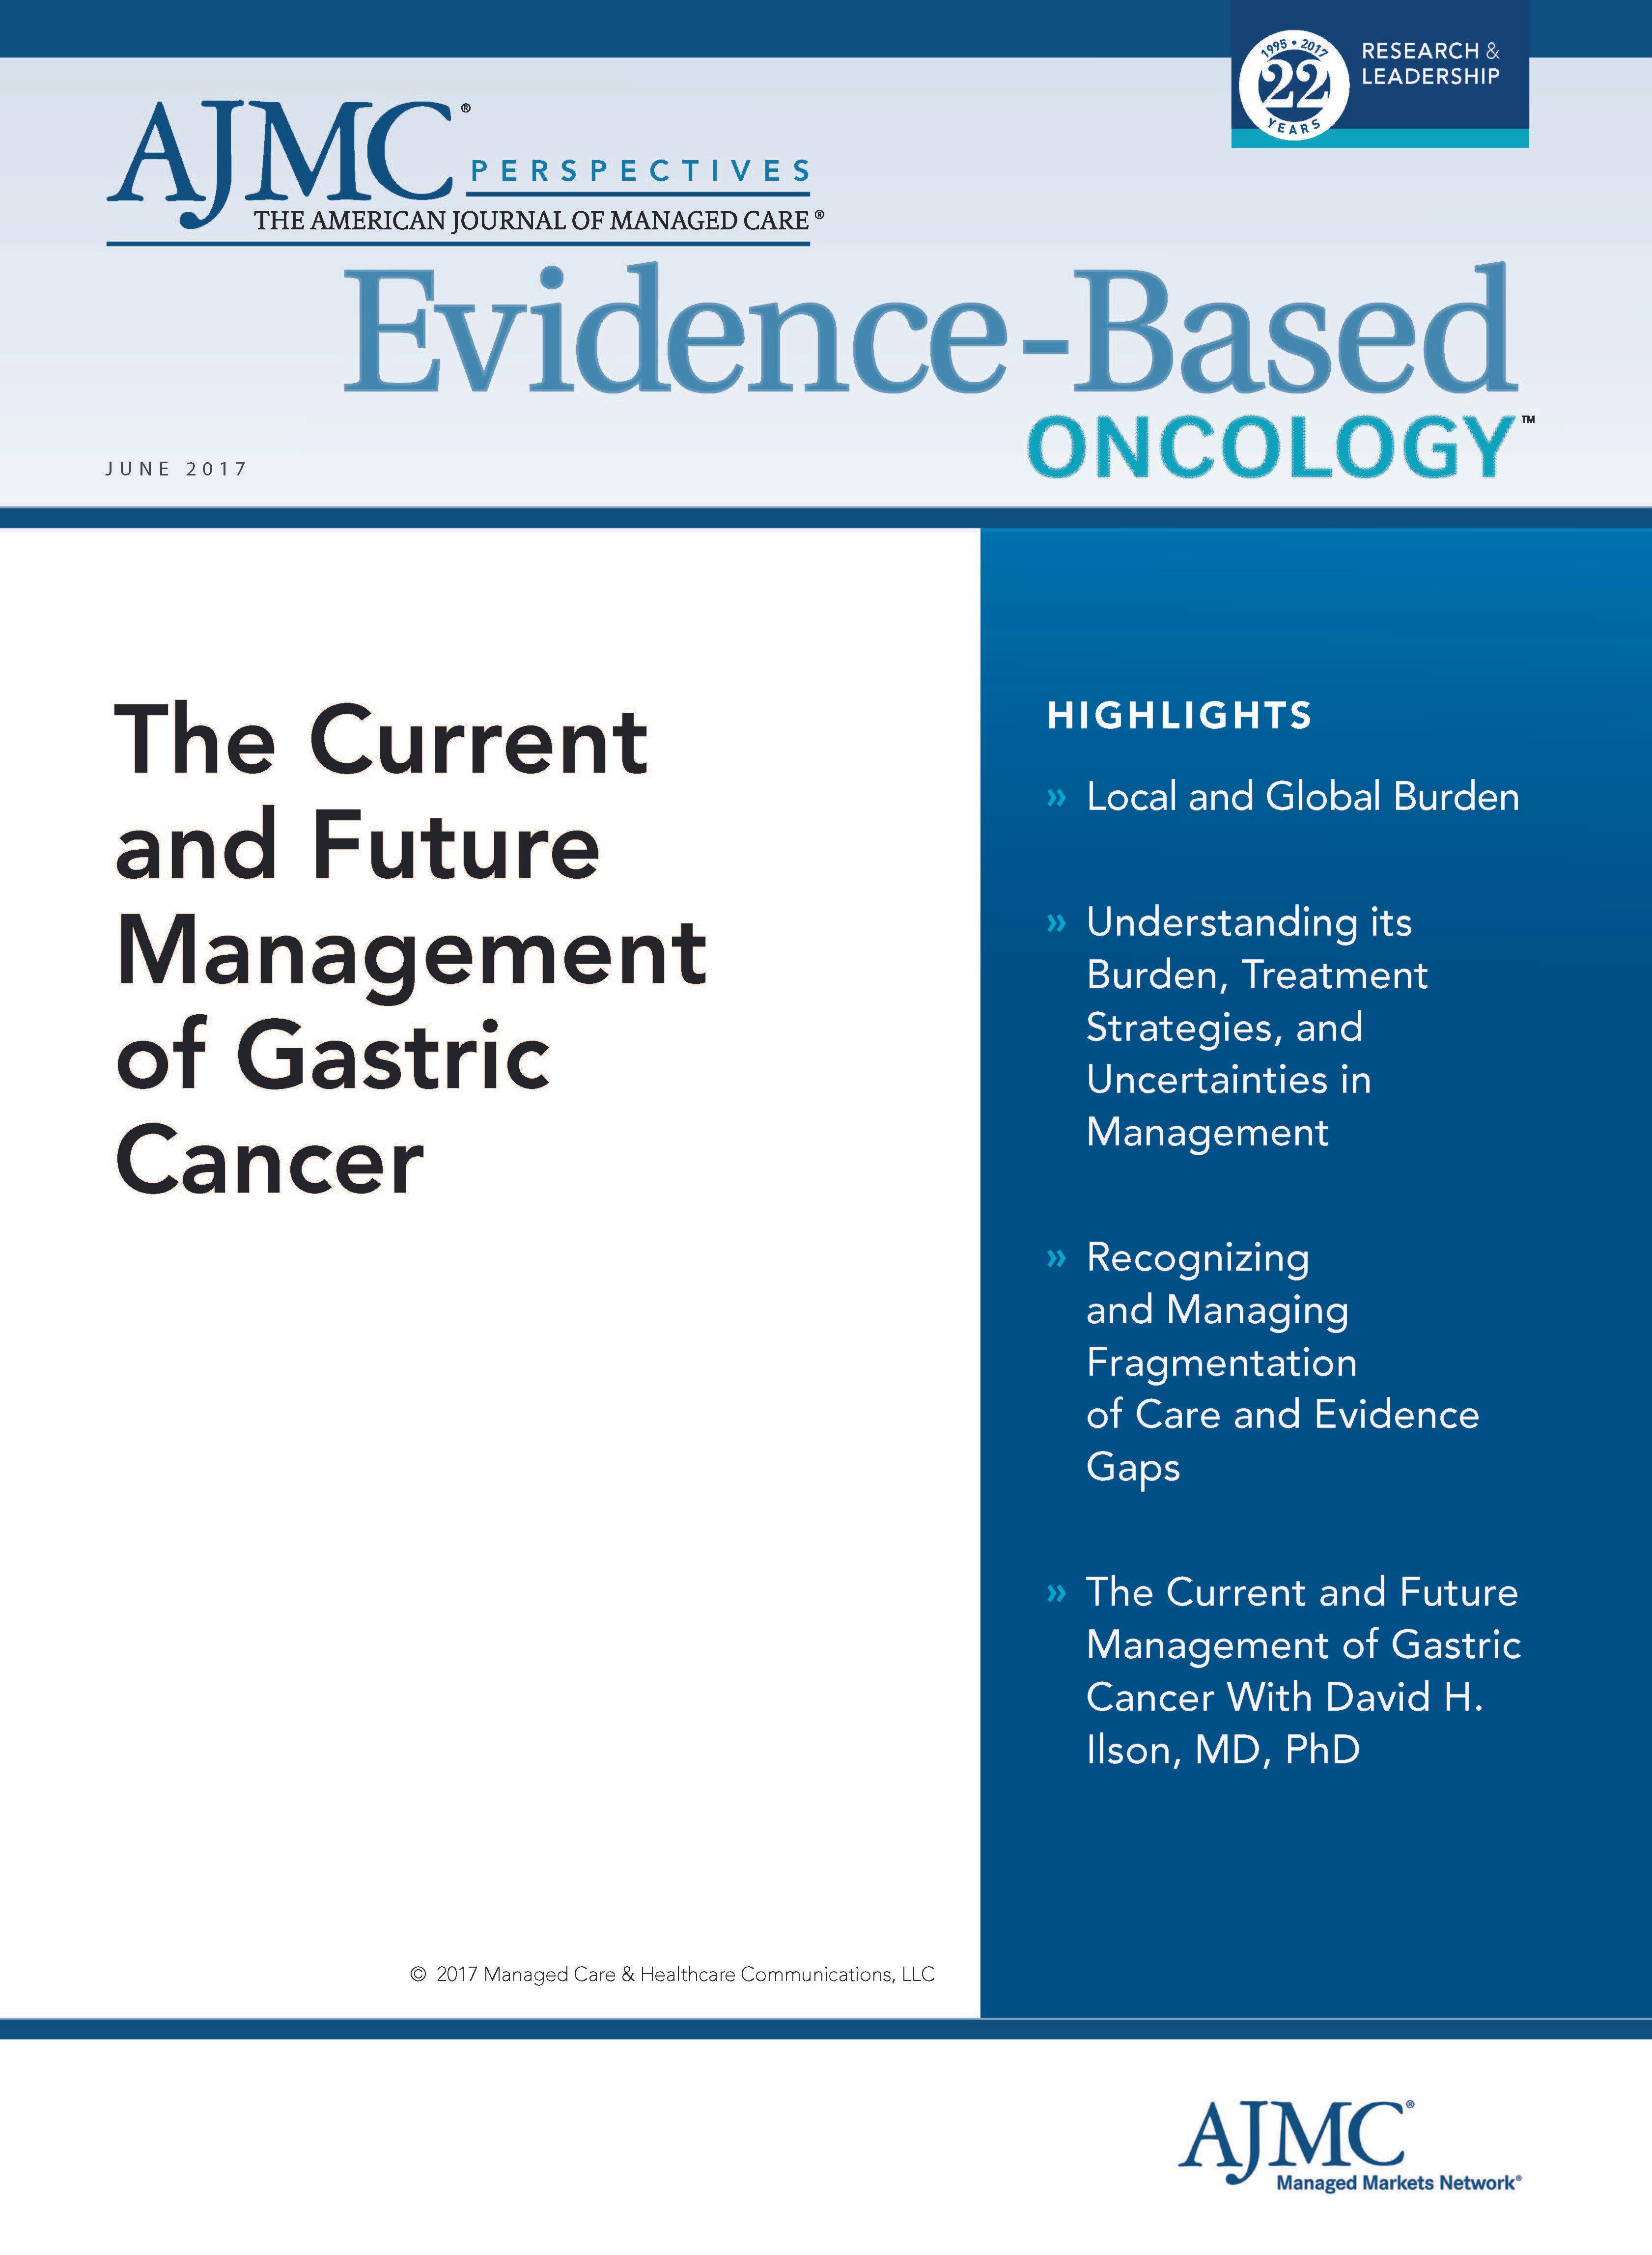 The Current and Future Management of Gastric Cancer